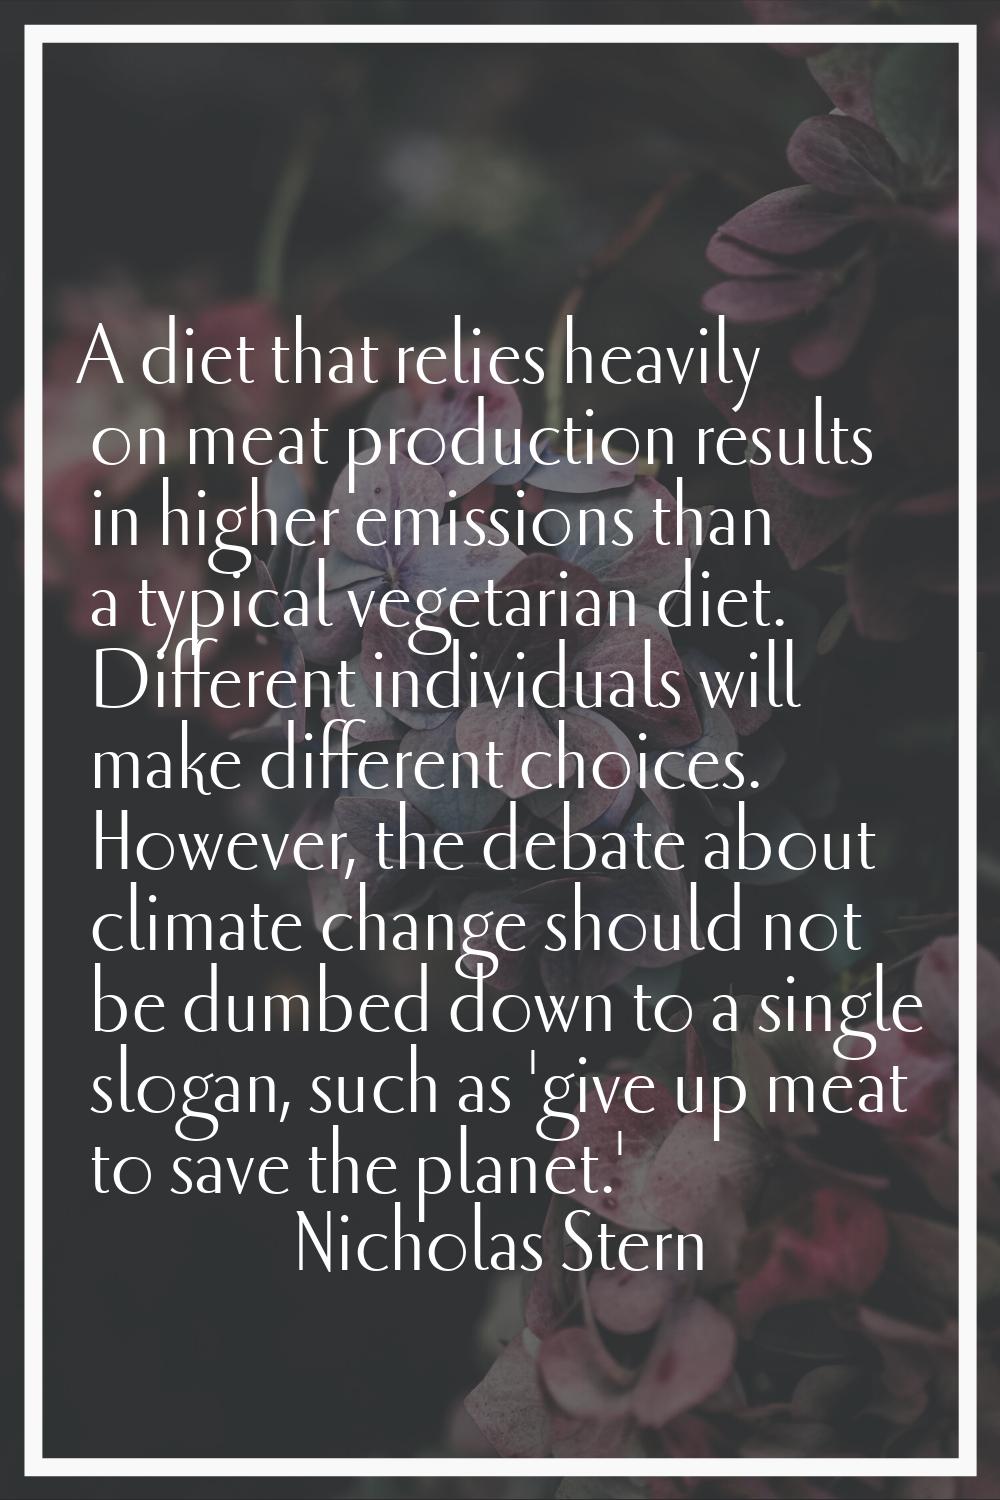 A diet that relies heavily on meat production results in higher emissions than a typical vegetarian